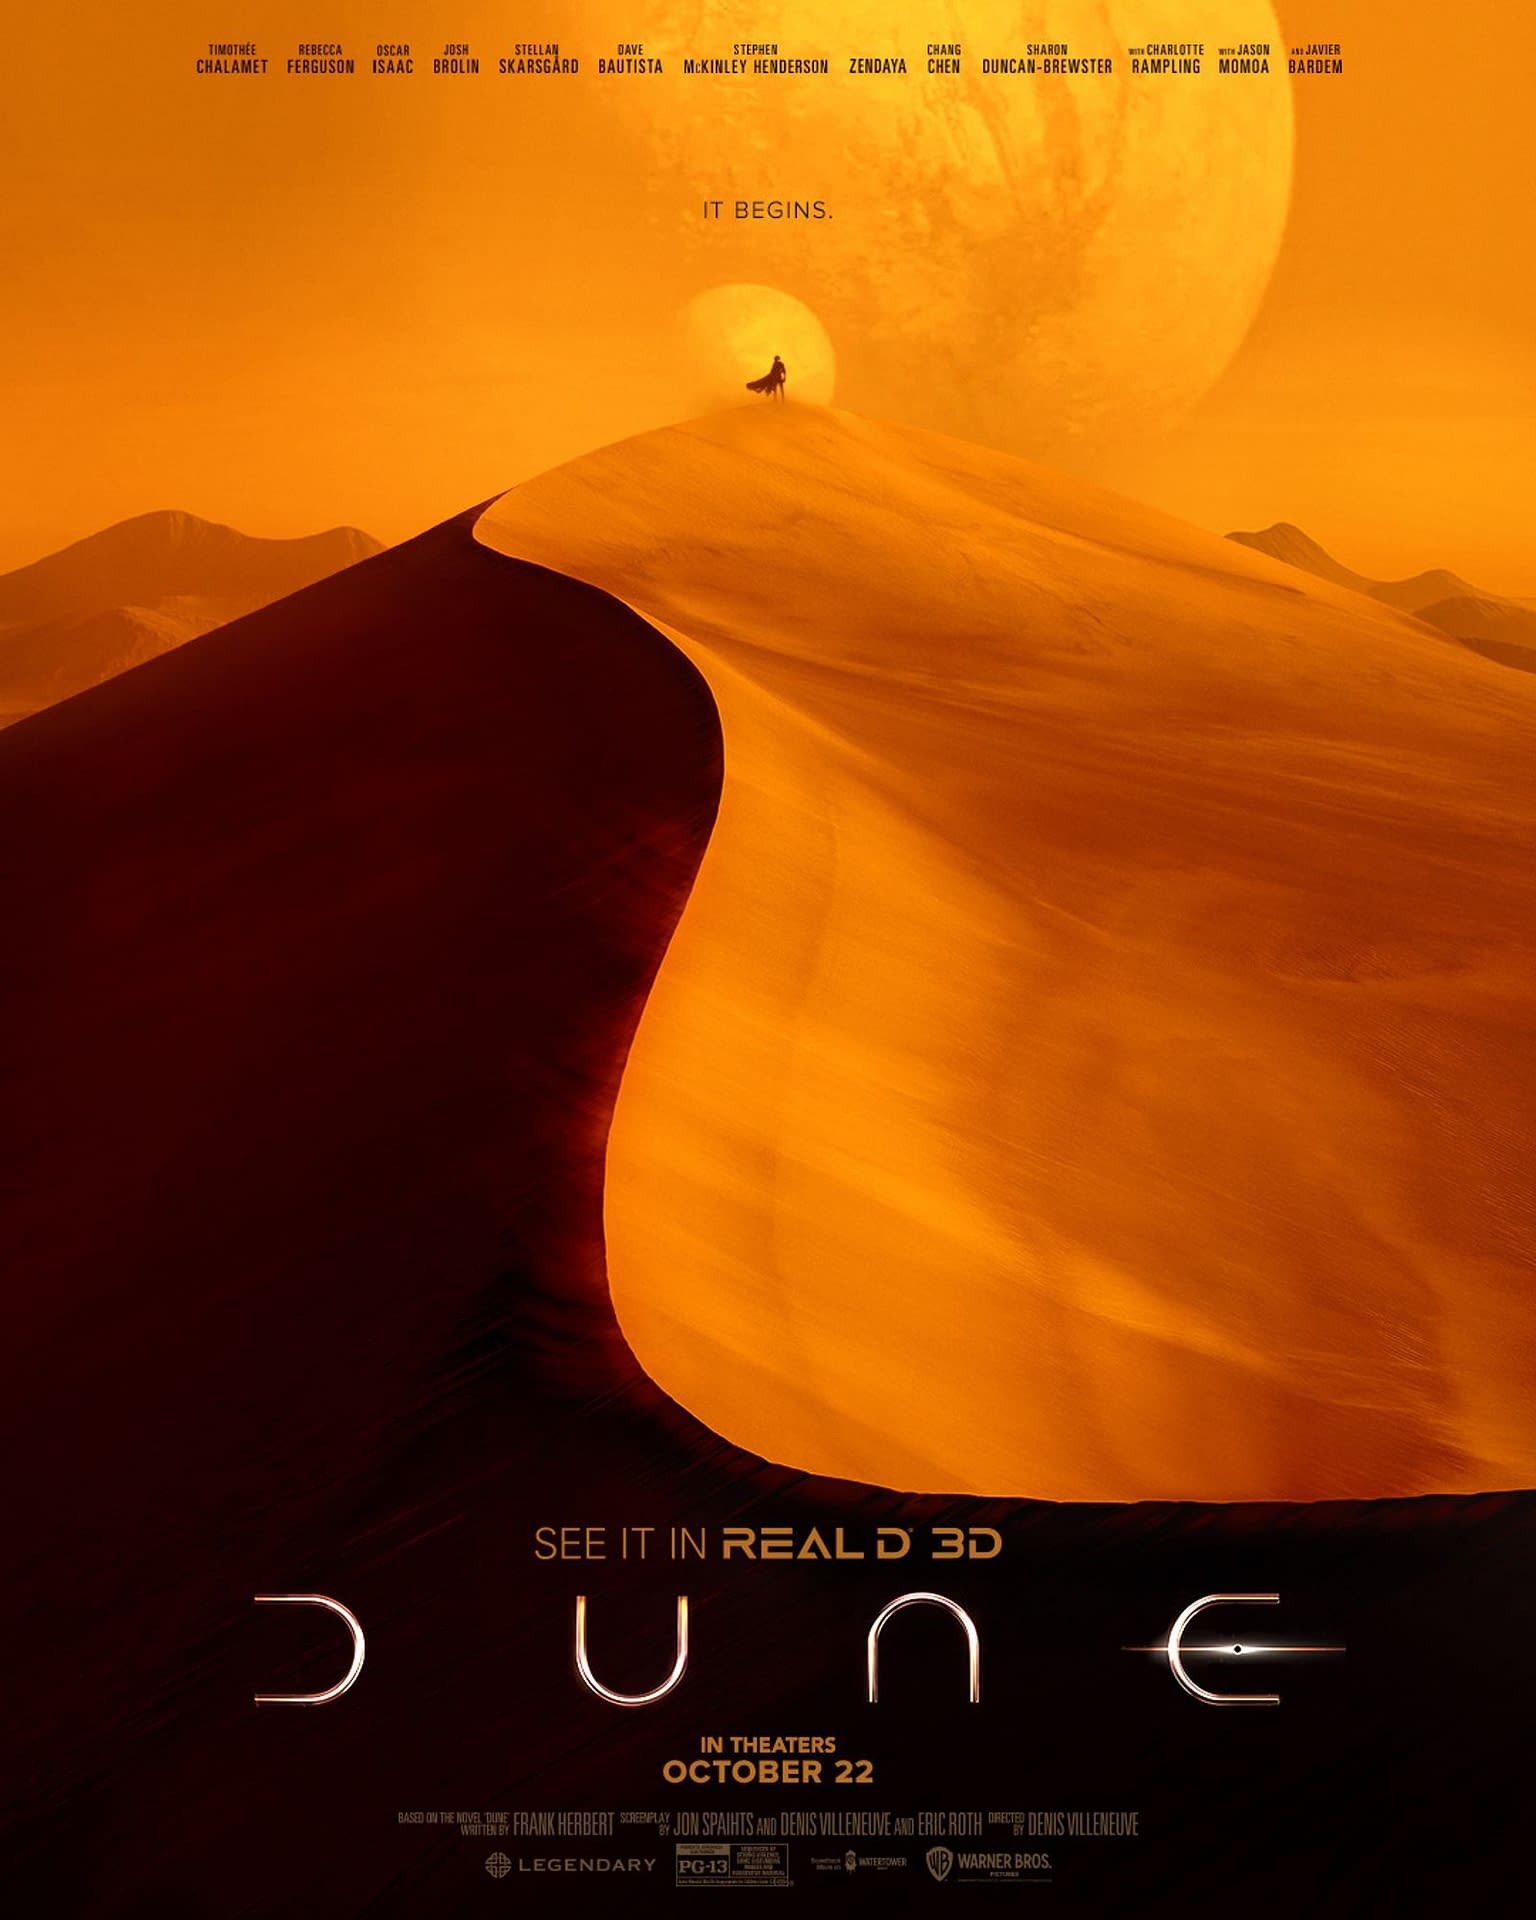 Dune Review: Weirdly Paced But Still Utterly Spectacular